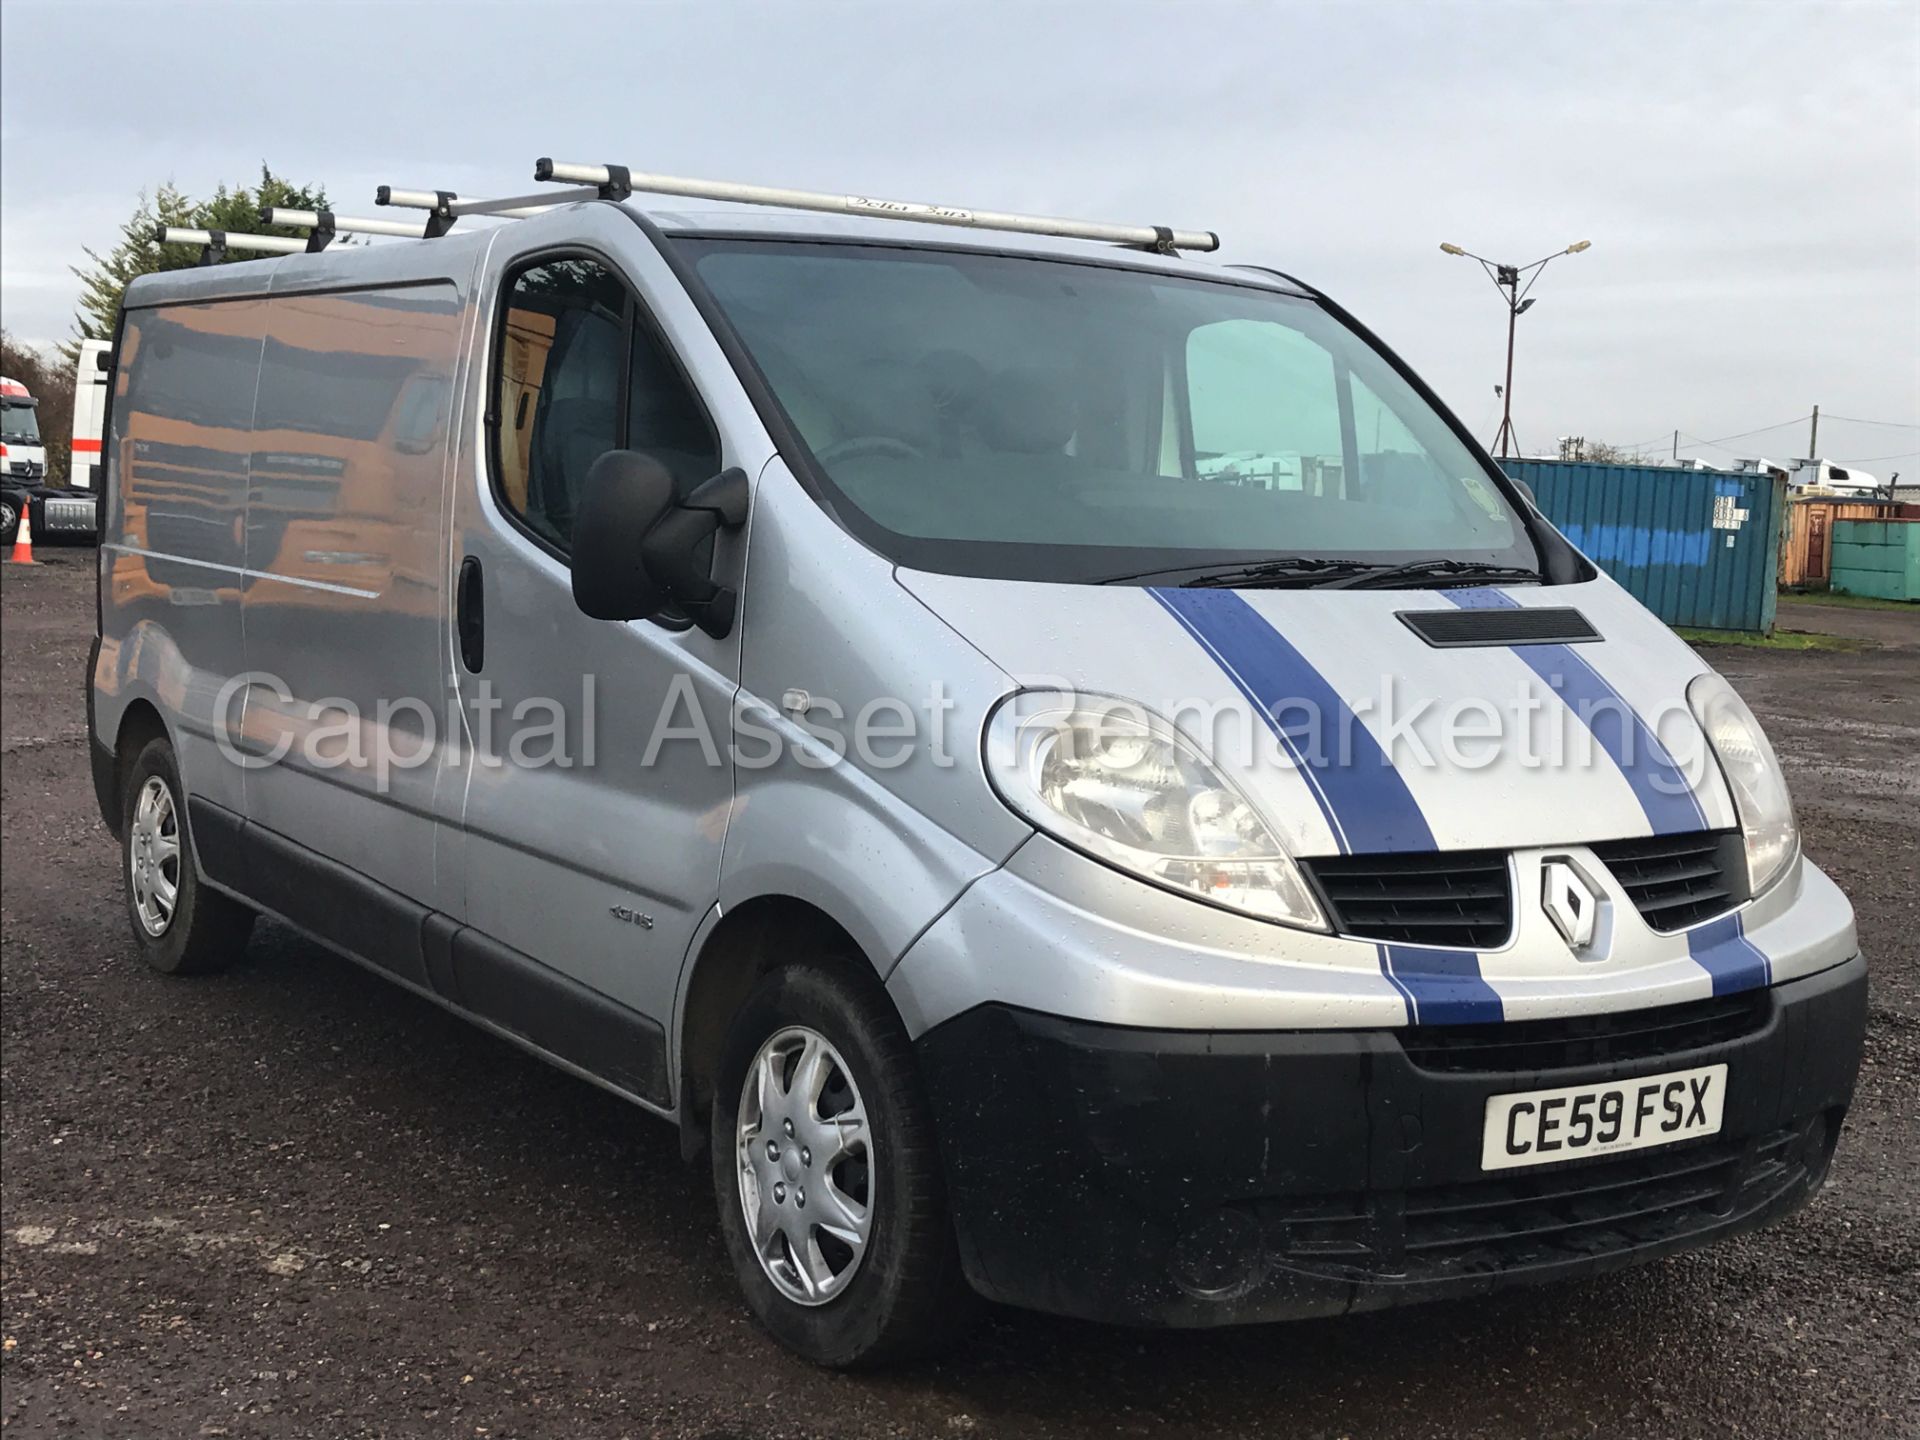 RENAULT TRAFIC LL29 DCI 115 (2010 MODEL) '2.0 DCI - 115 PS - 6 SPEED - LWB' **AIR CON** - Image 2 of 20